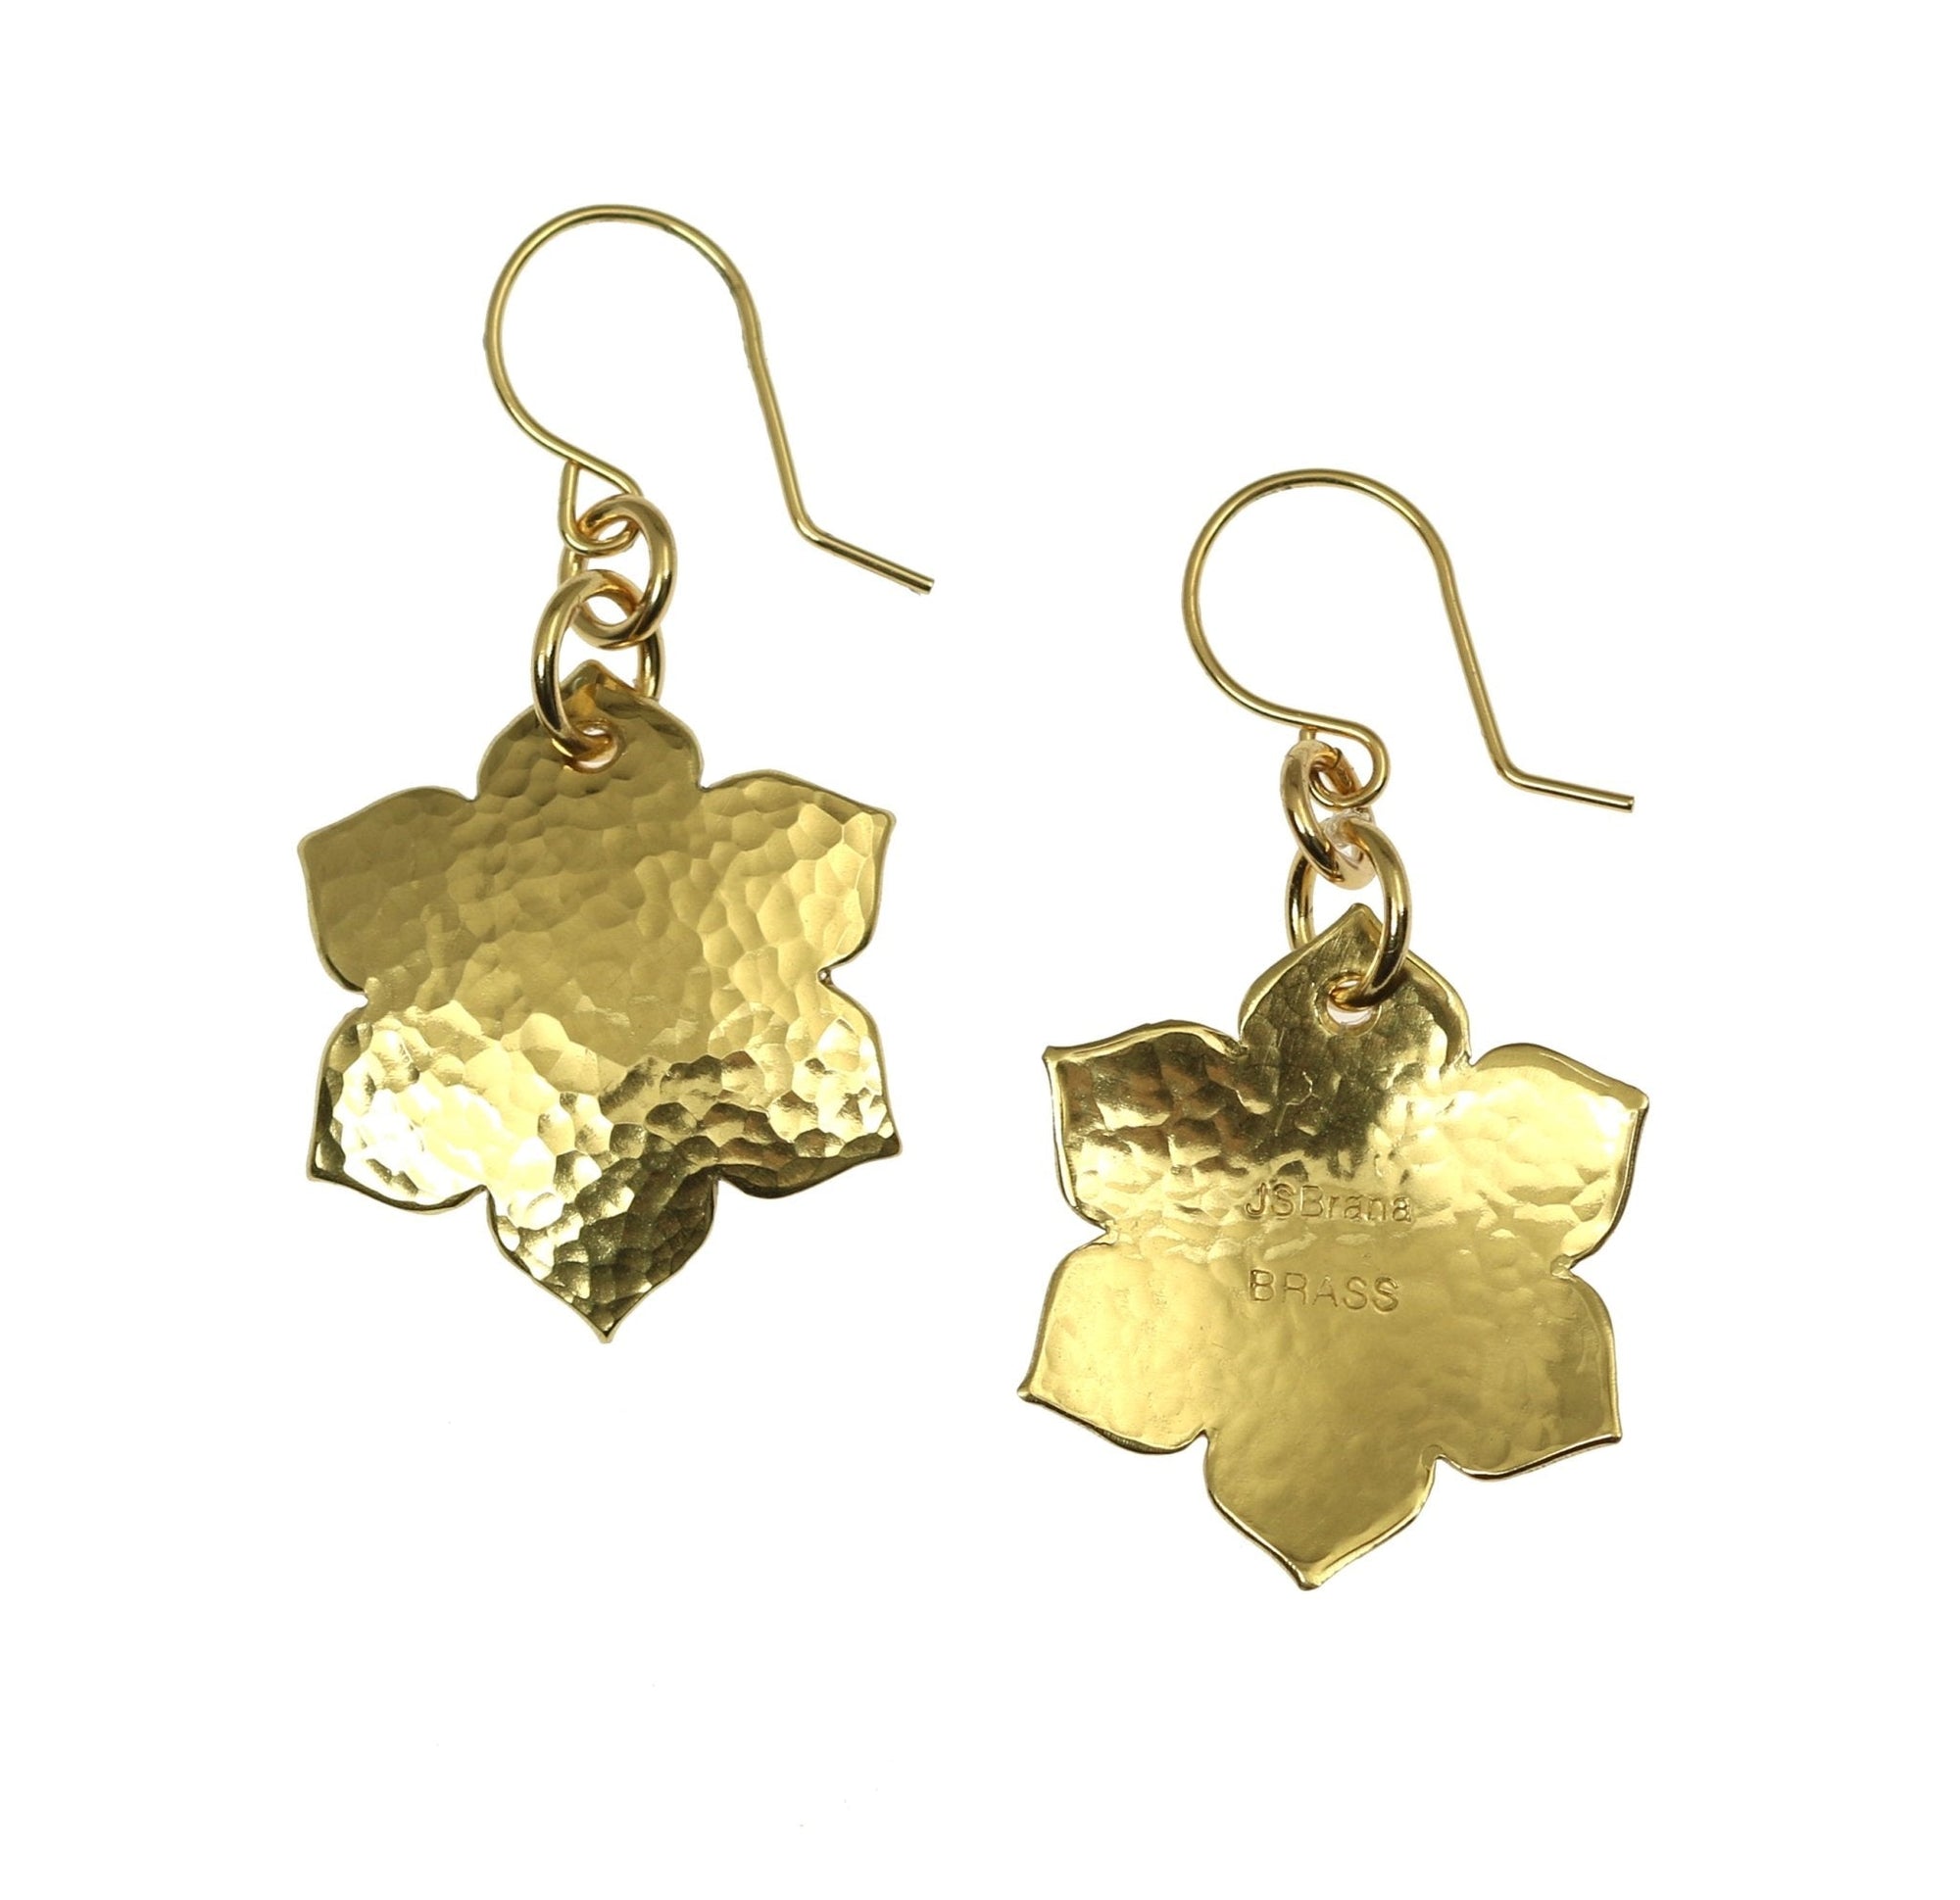 Detail View of Hammered Nu Gold Arabesque Flower Earrings